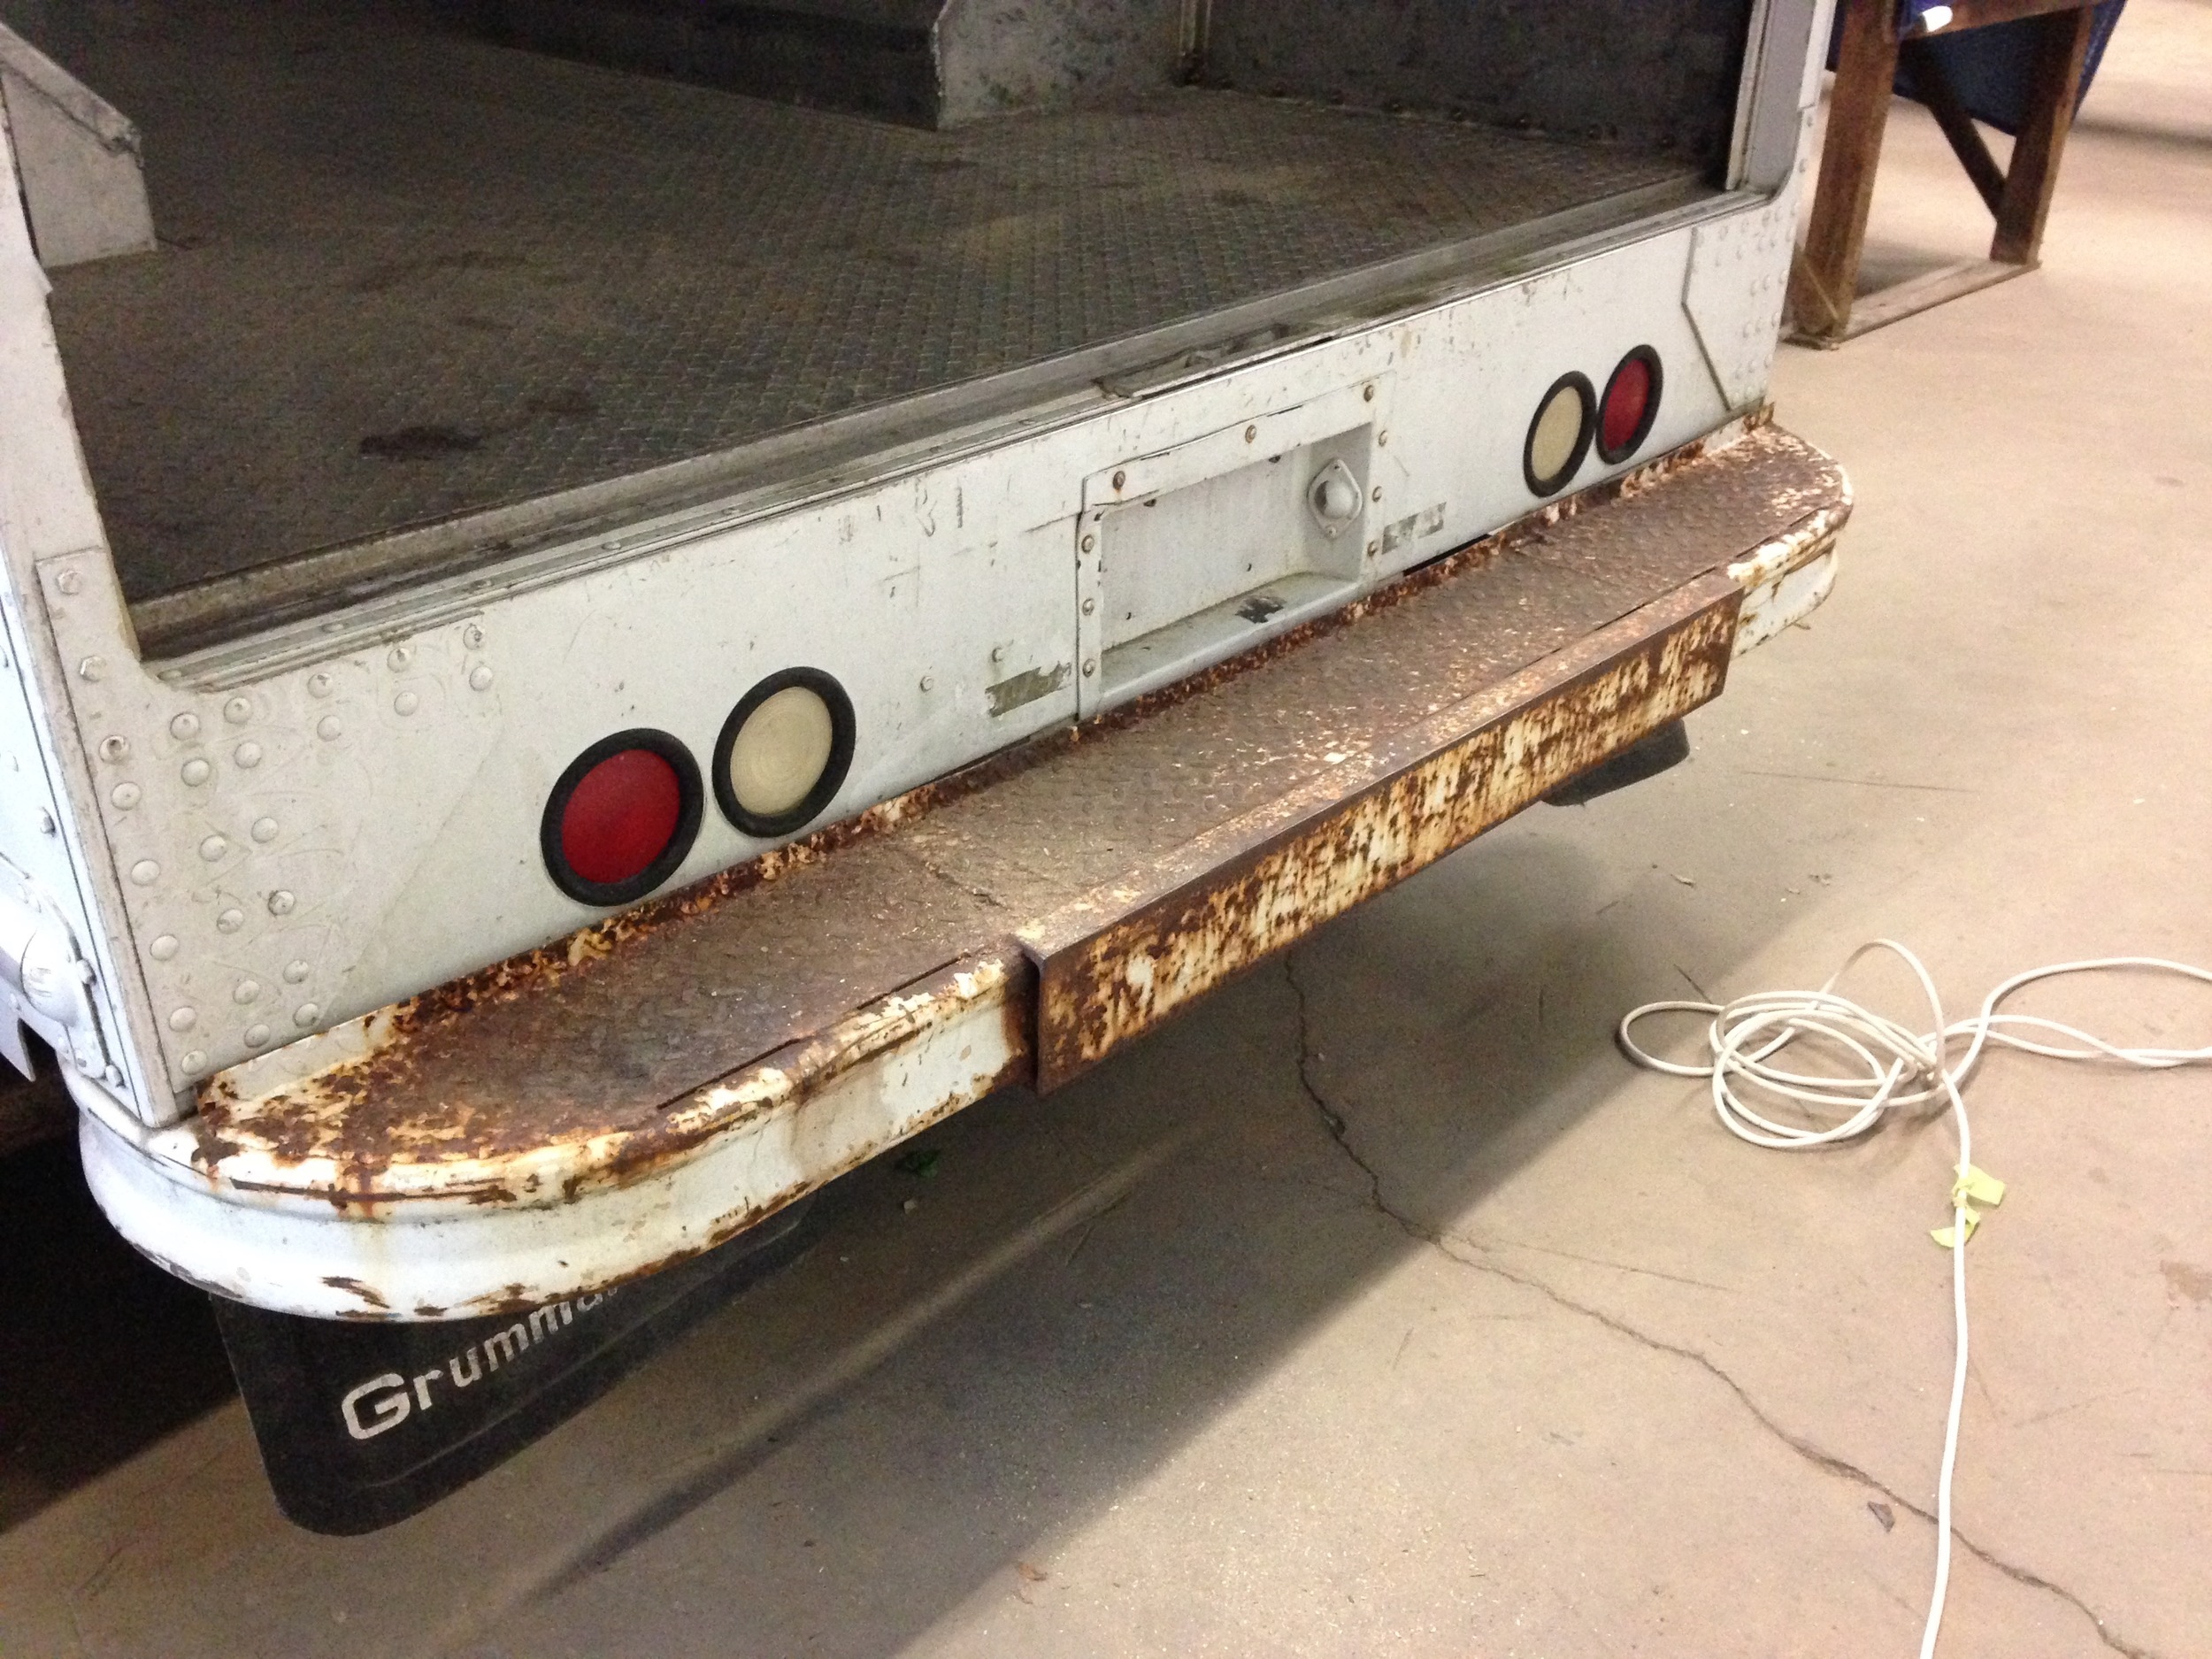 rusted bumper - and now I have a plan to de-rust it! Thanks Carrick.